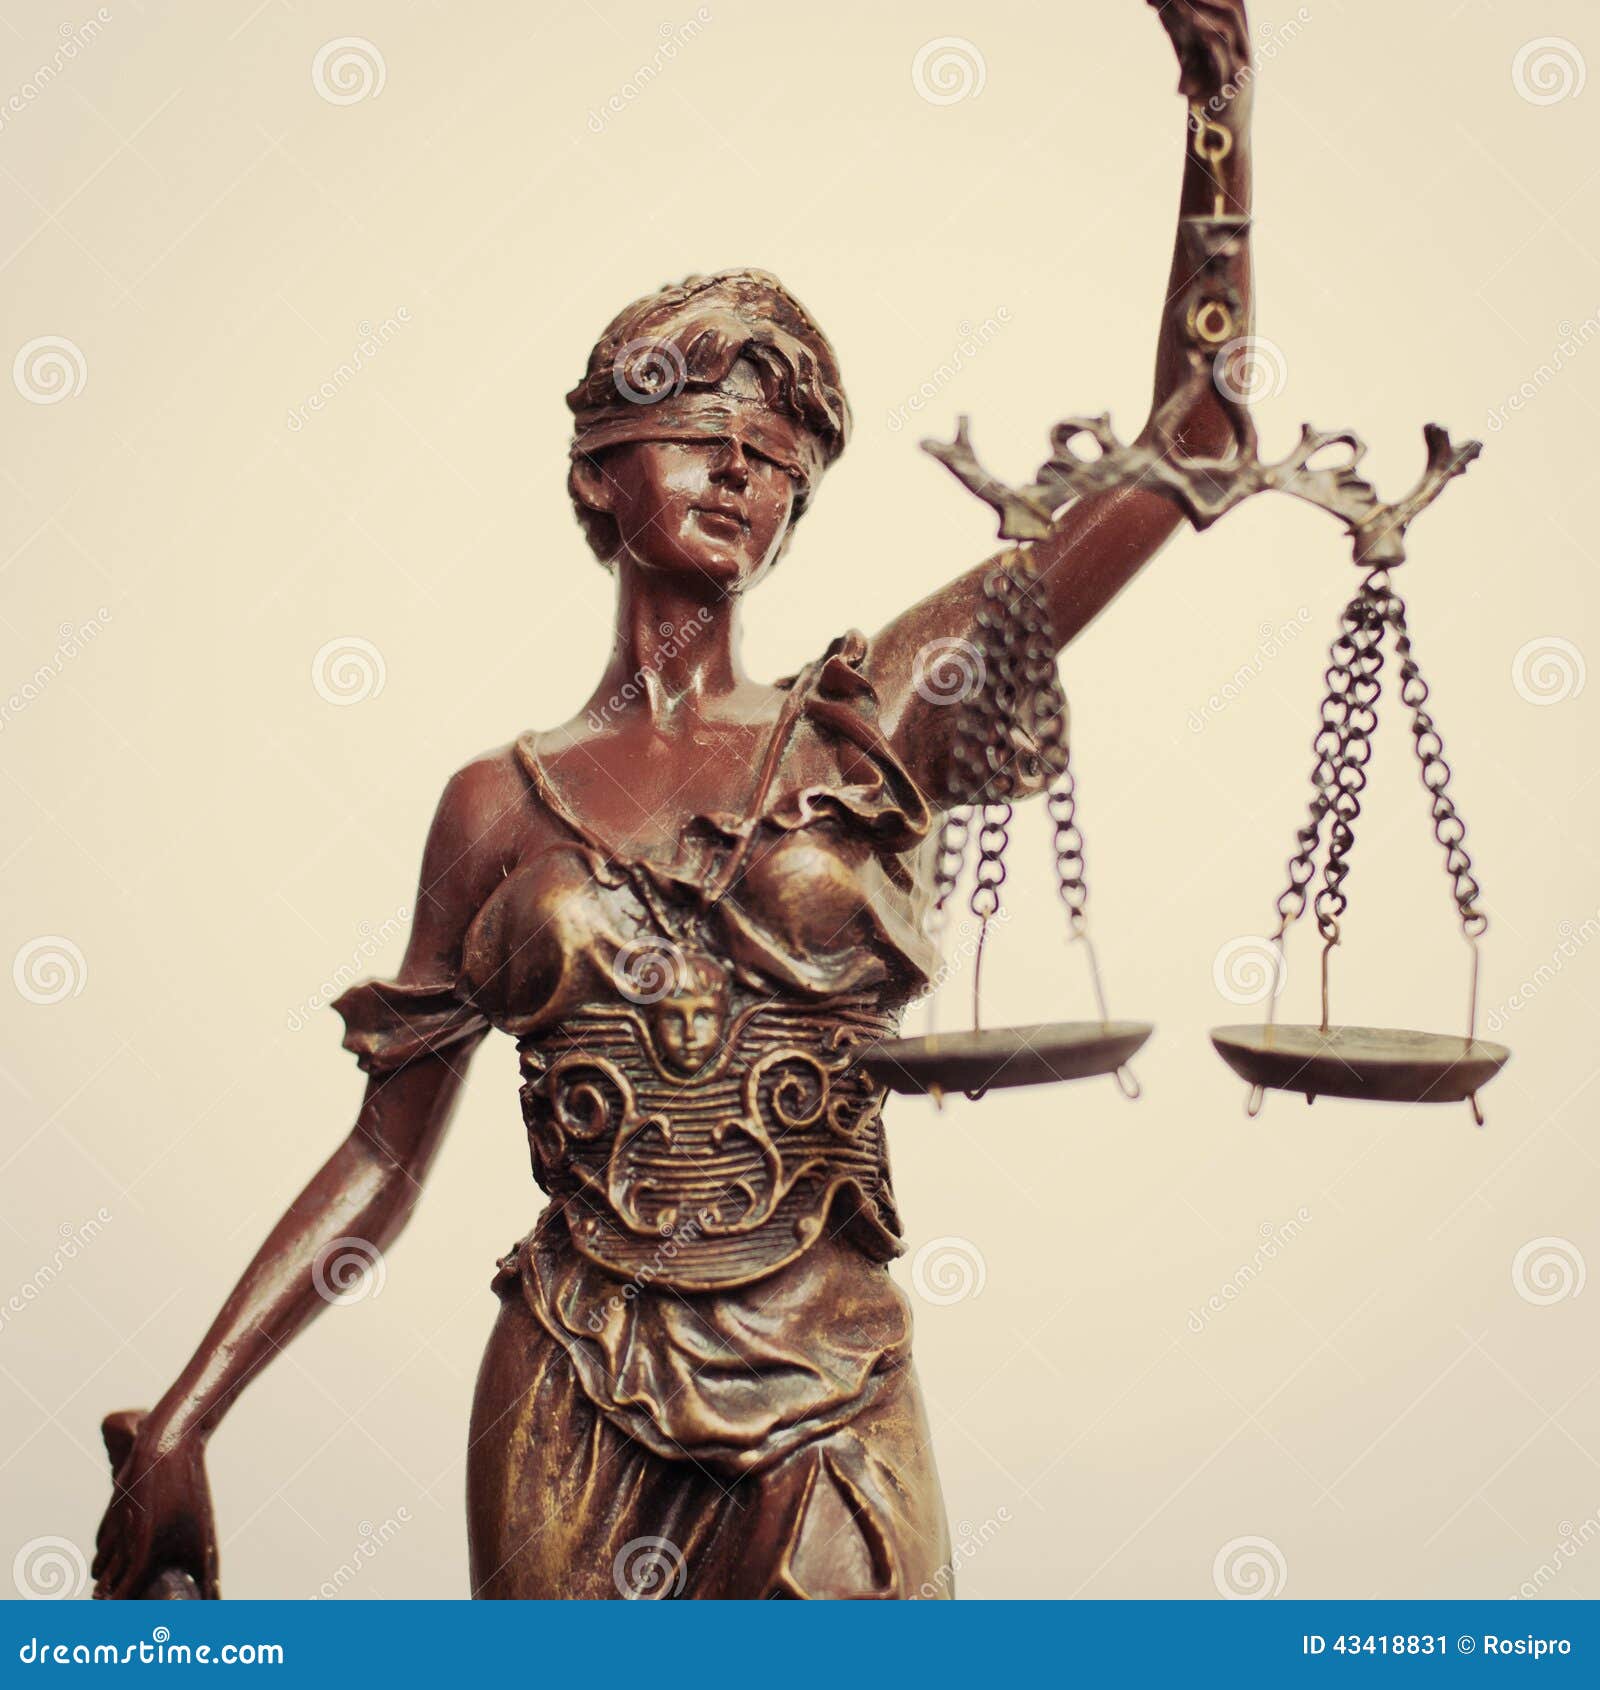 Albums 105+ Images what does the blindfold mean on lady justice Full HD, 2k, 4k